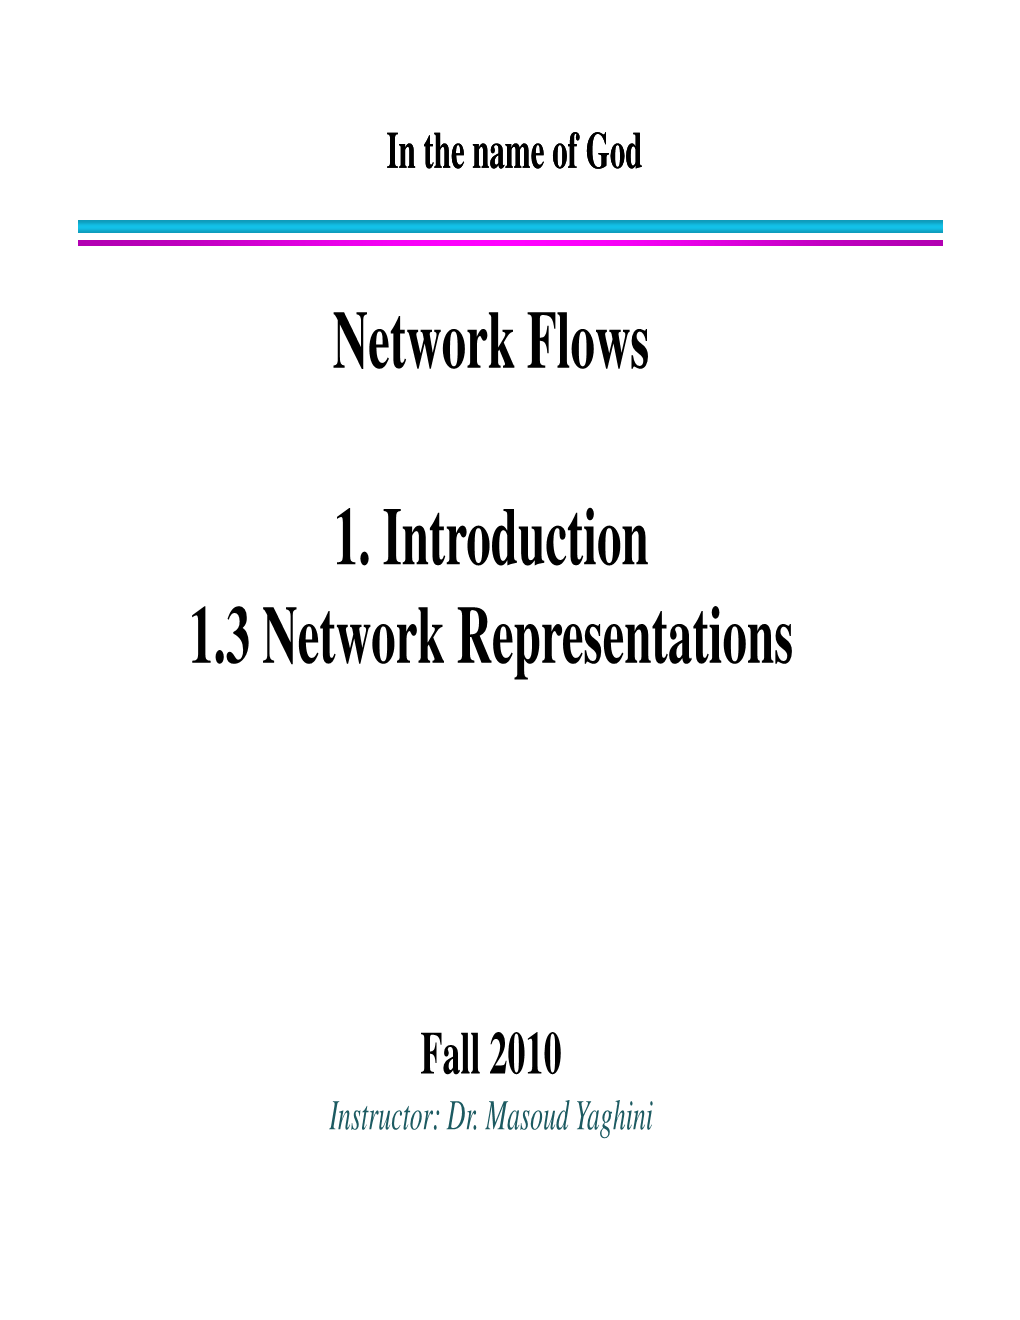 Network Flows 1. Introduction 1.3 Network Representations